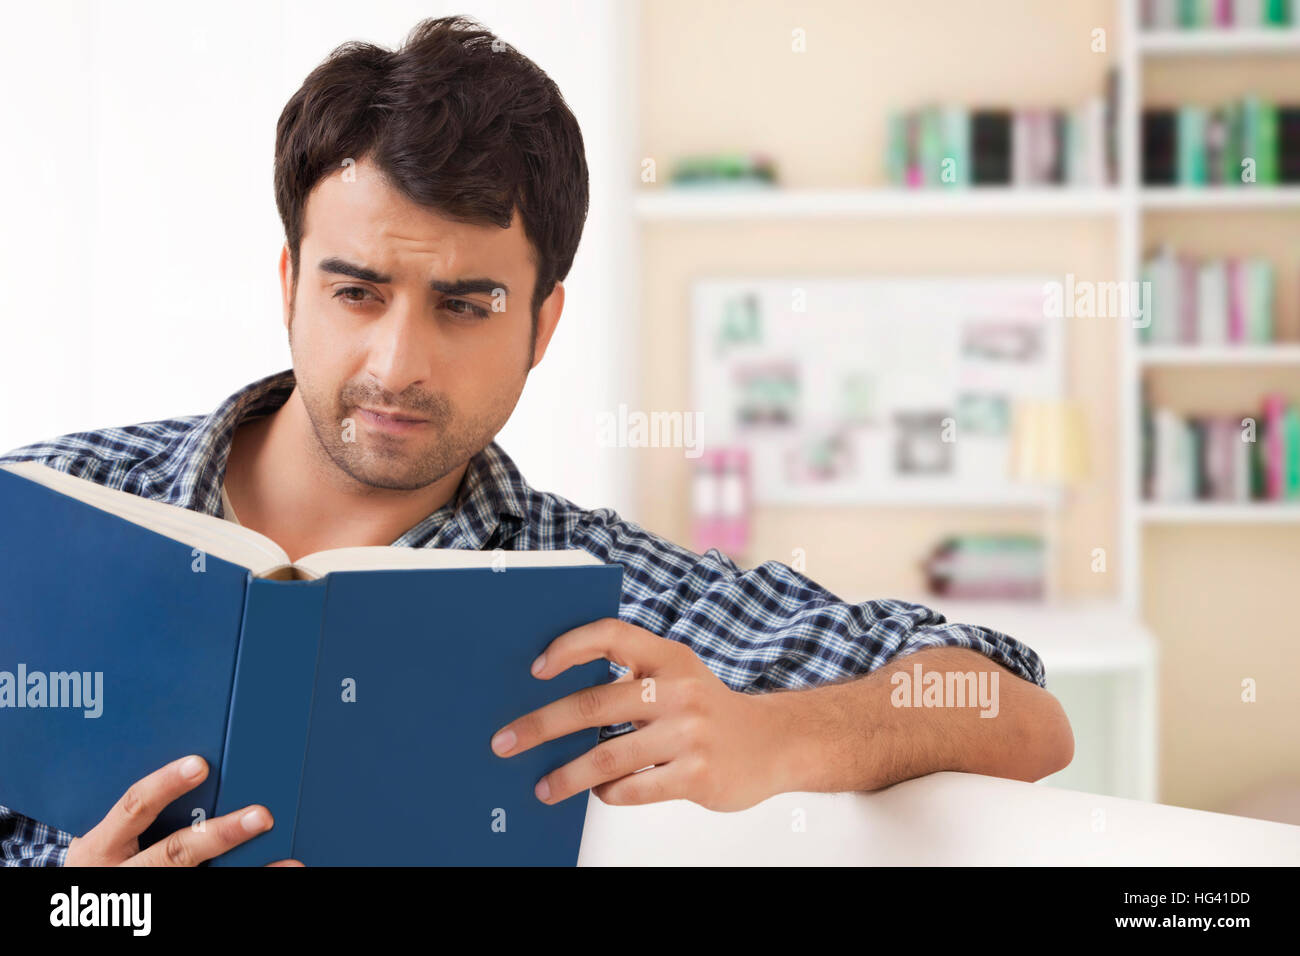 Young man reading book Stock Photo